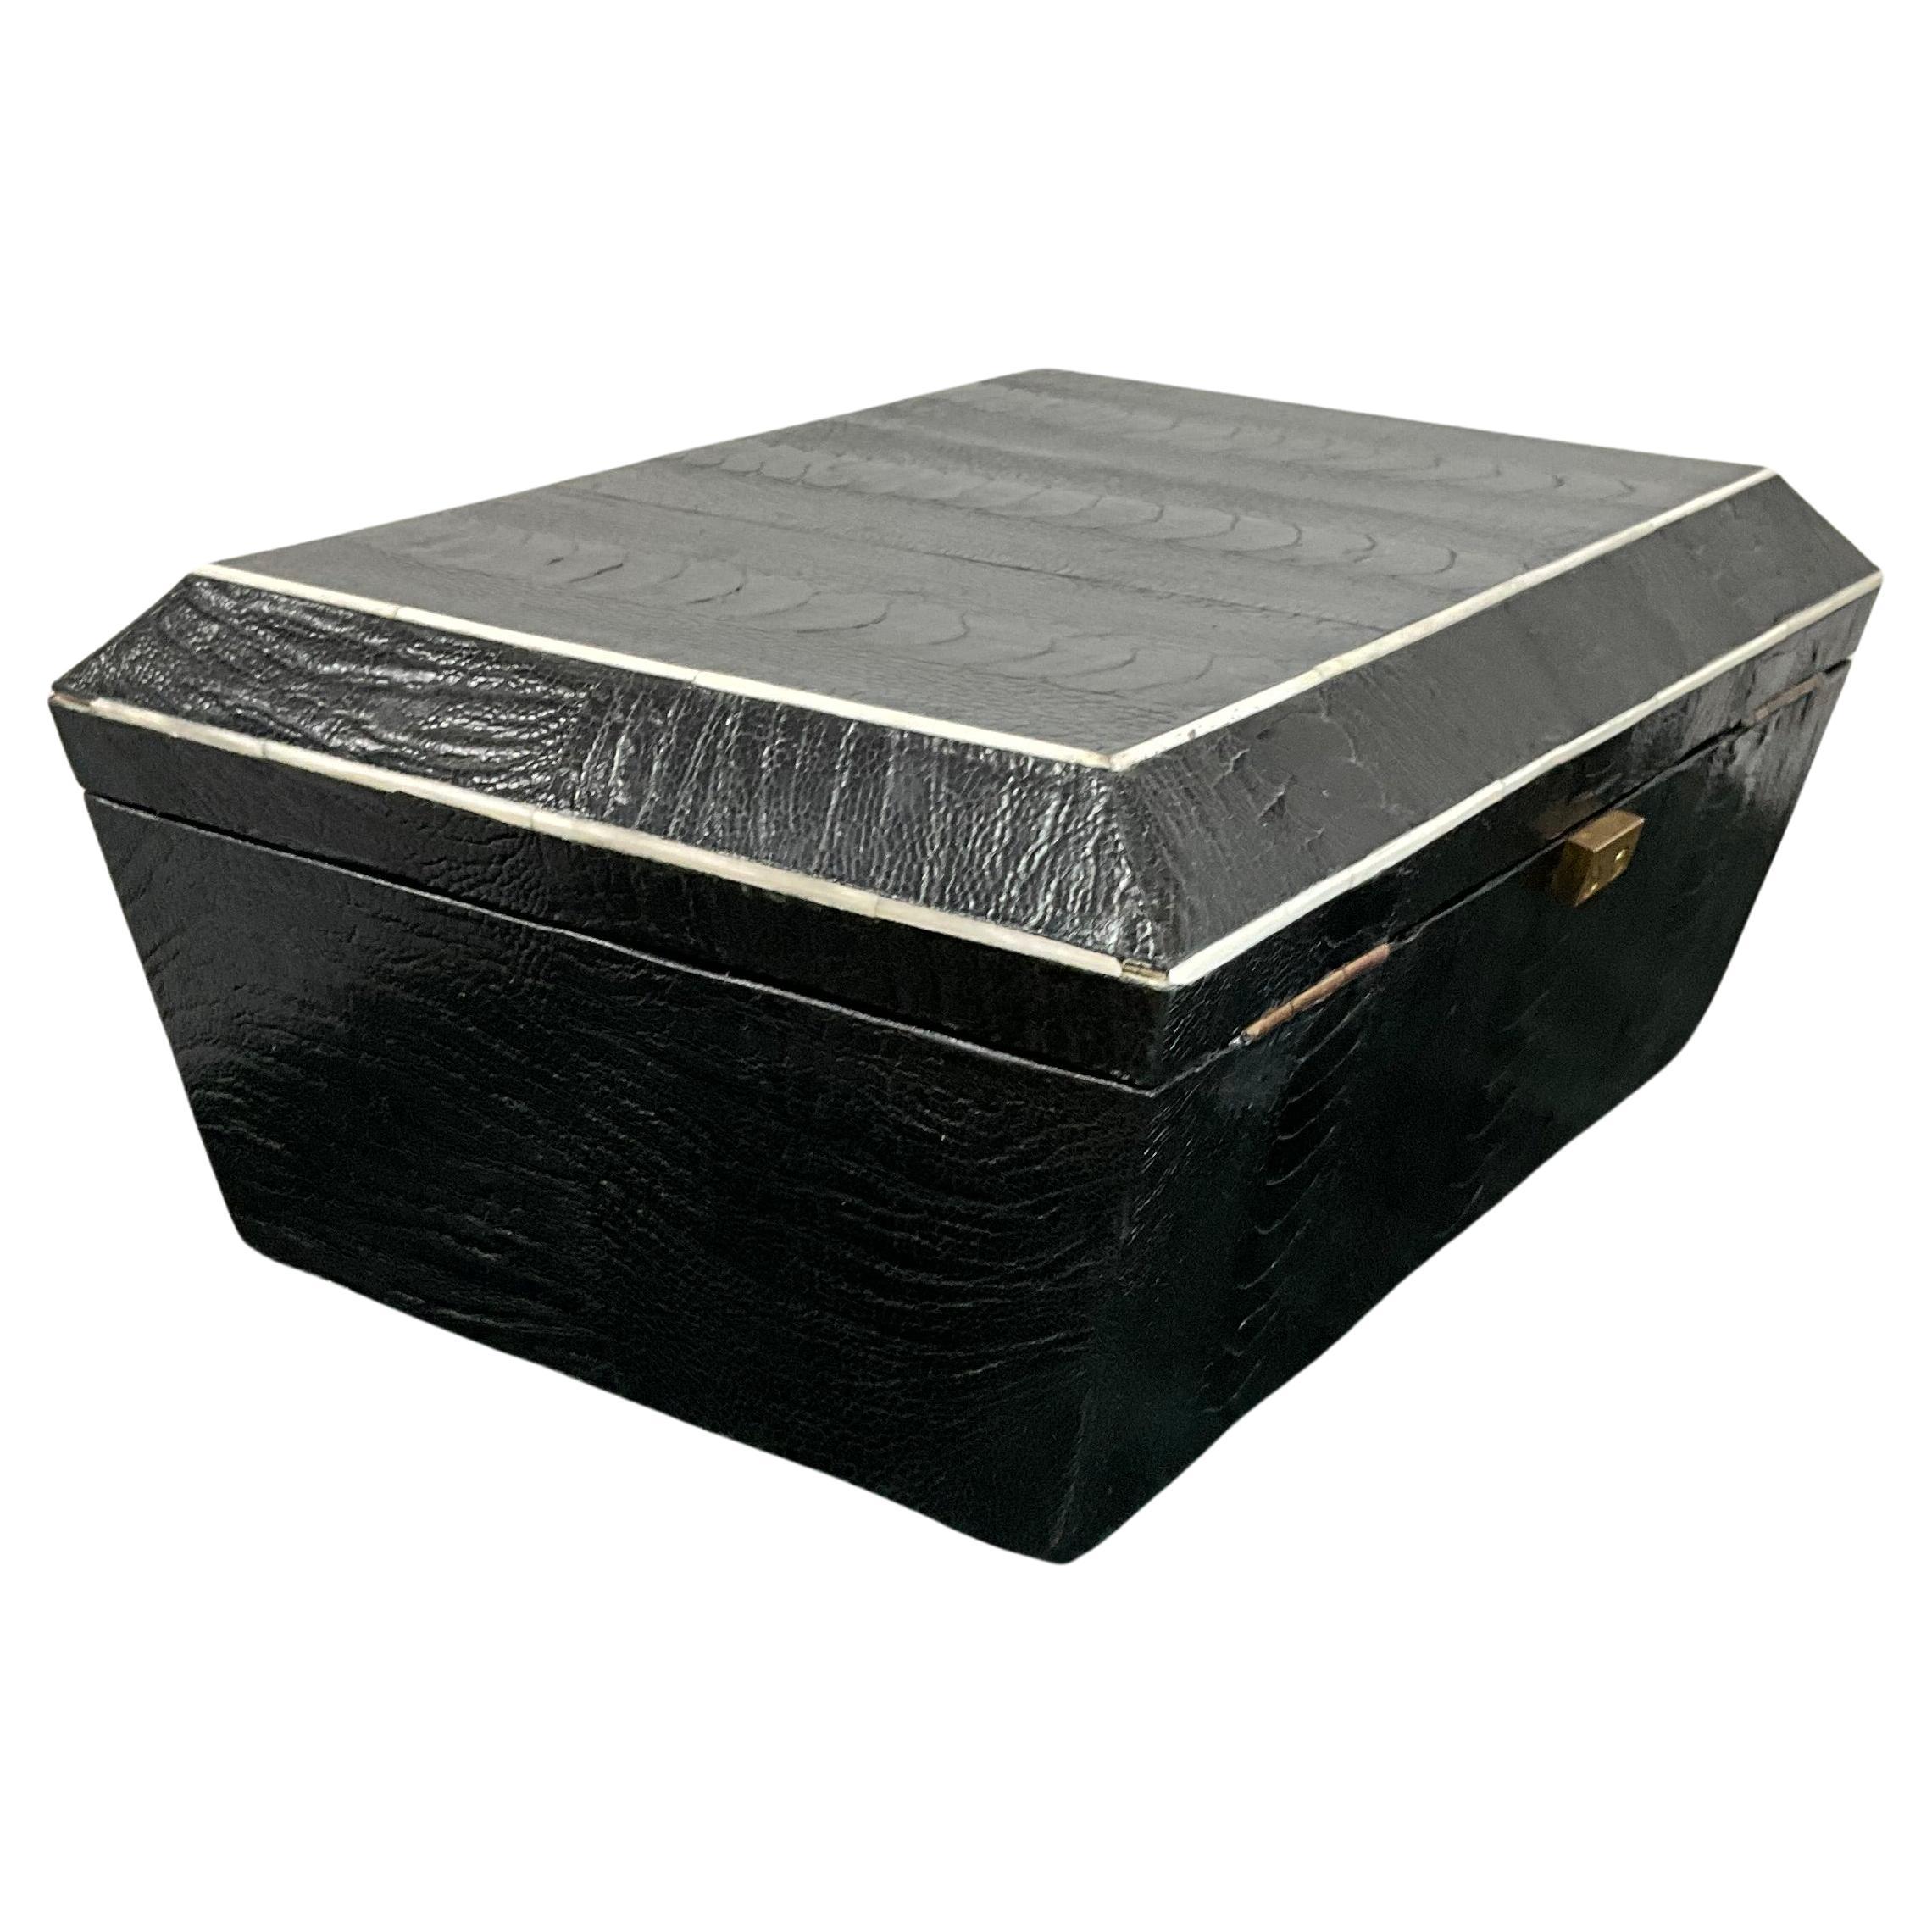 Large wood box clad in snake skin with a removable upper tray on the interior which is suitable for jewelry or small keepsakes. The interior is lined in black felt and has the R&Y Augousti brass label on the back wall, and also has the R&Y Augousti 